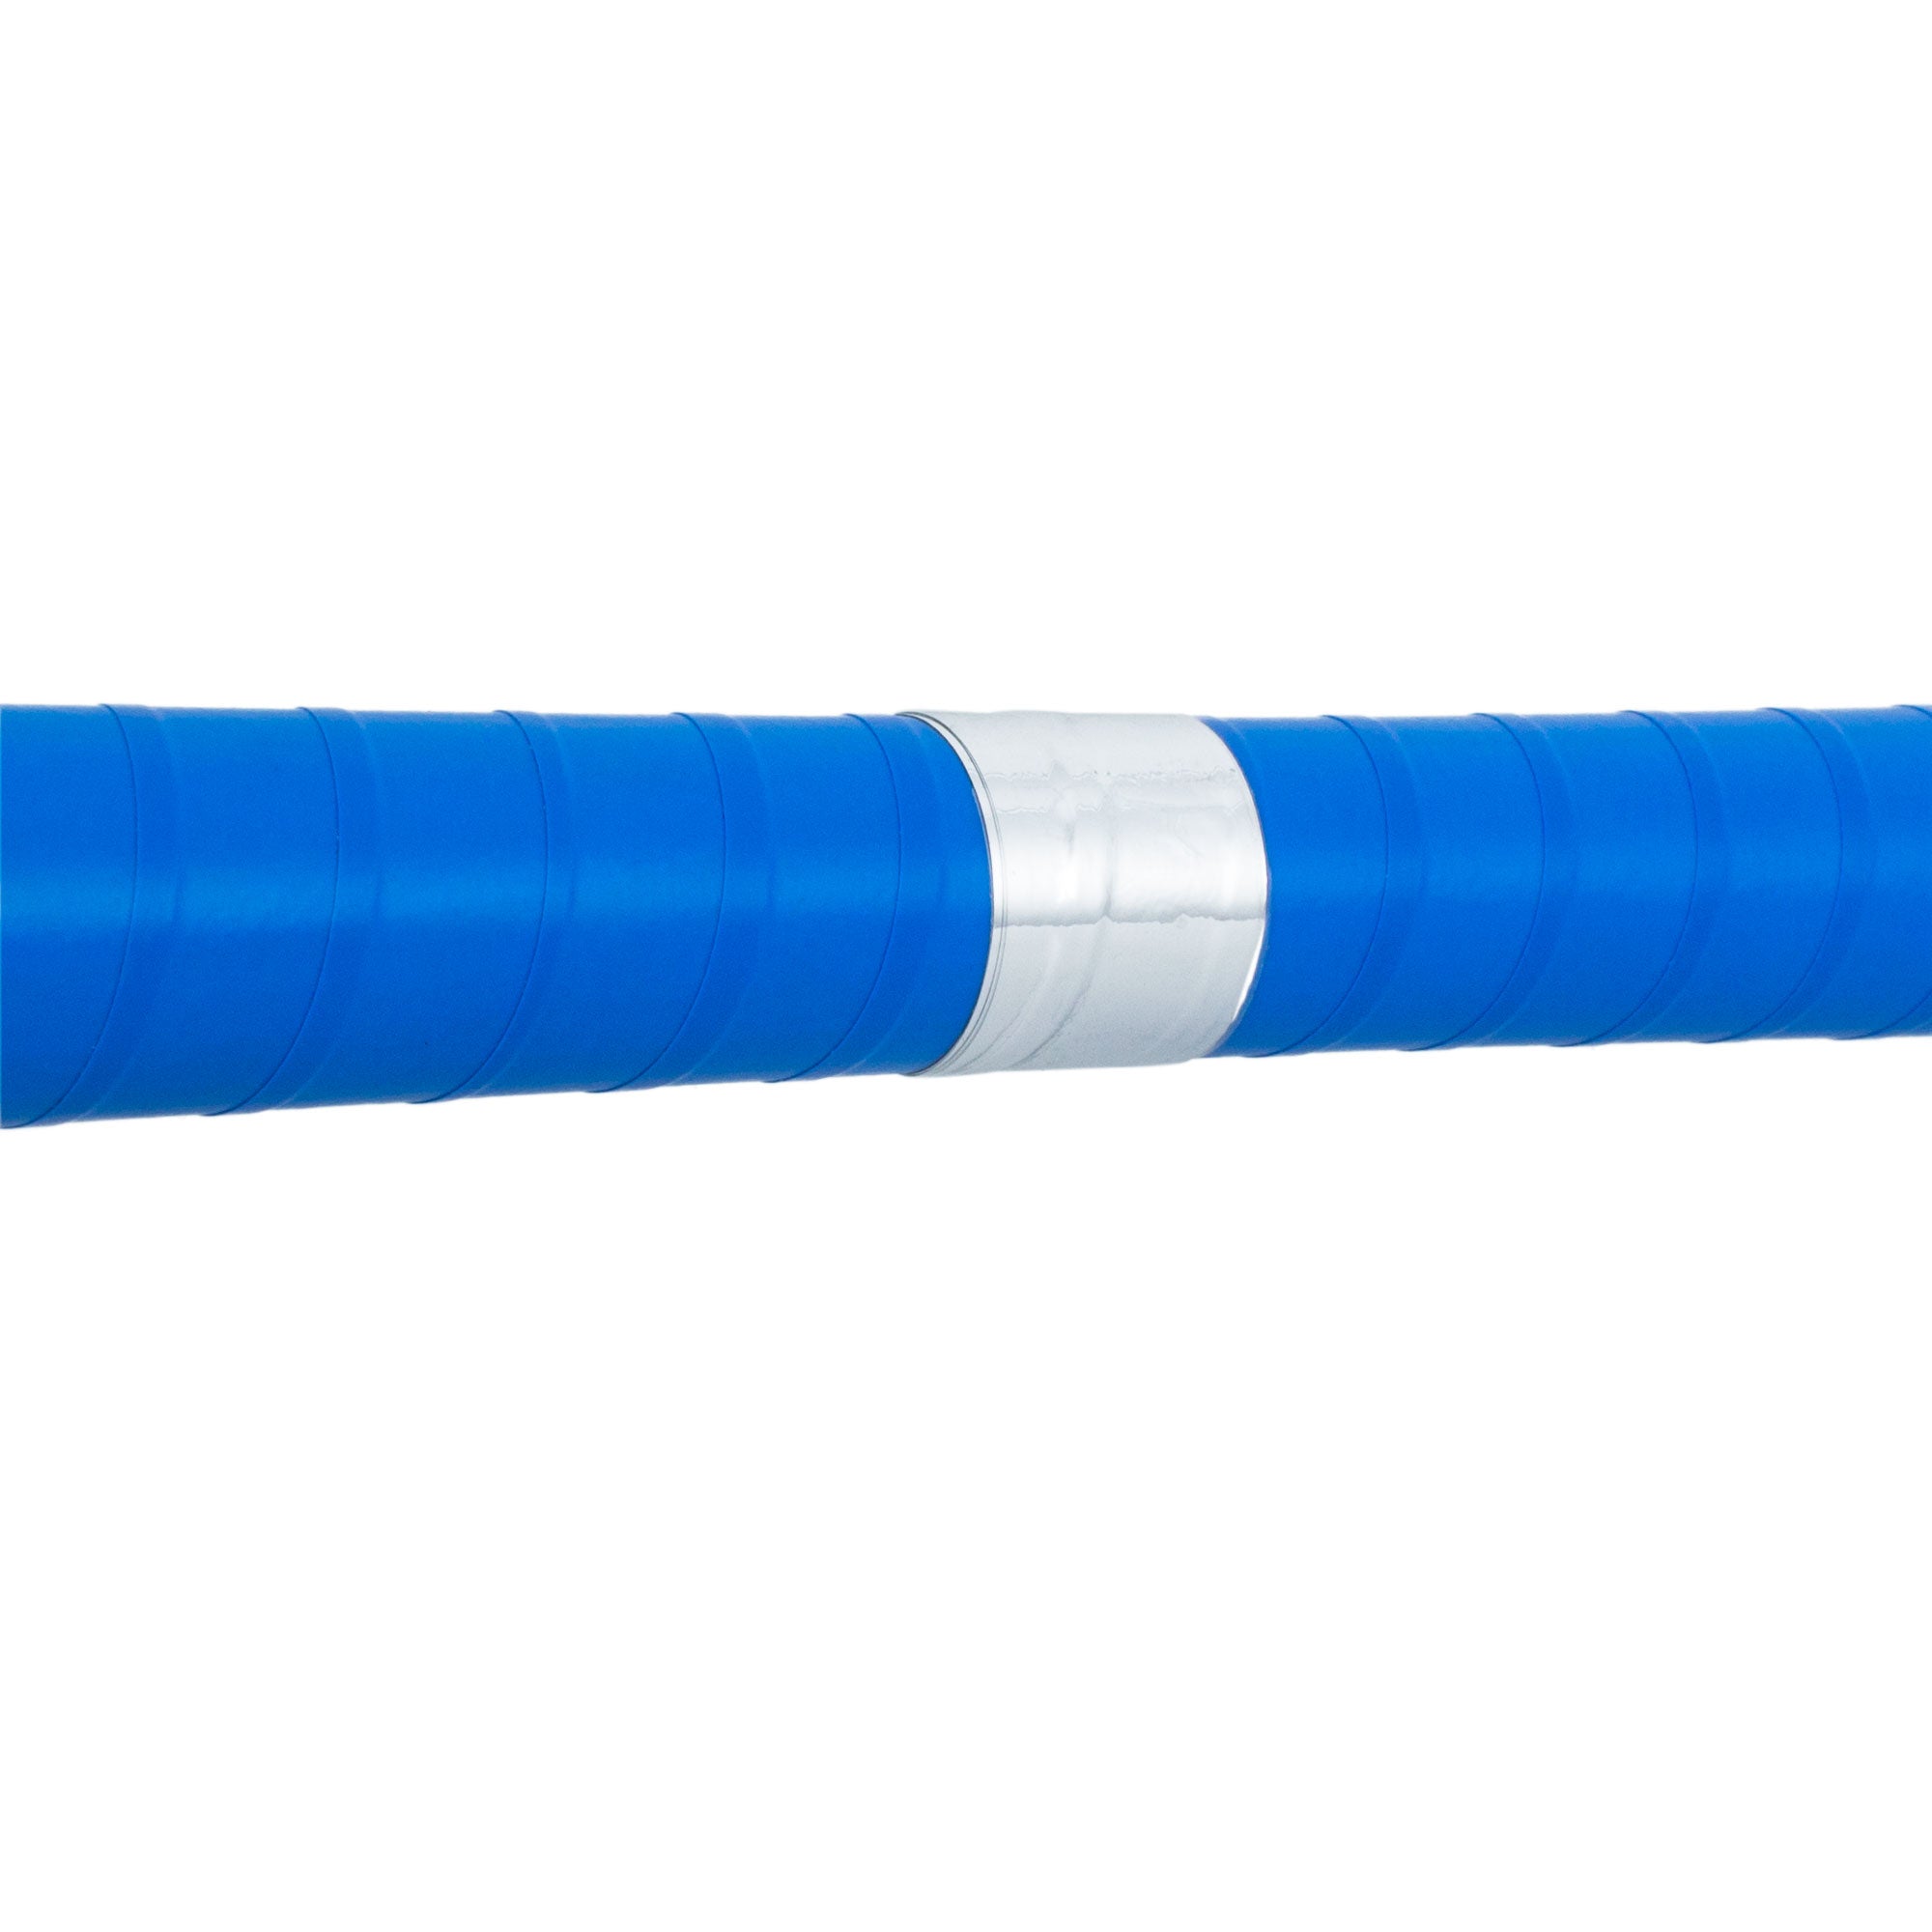 tapered centre point of fire devilstick marked with silver tape on blue tape